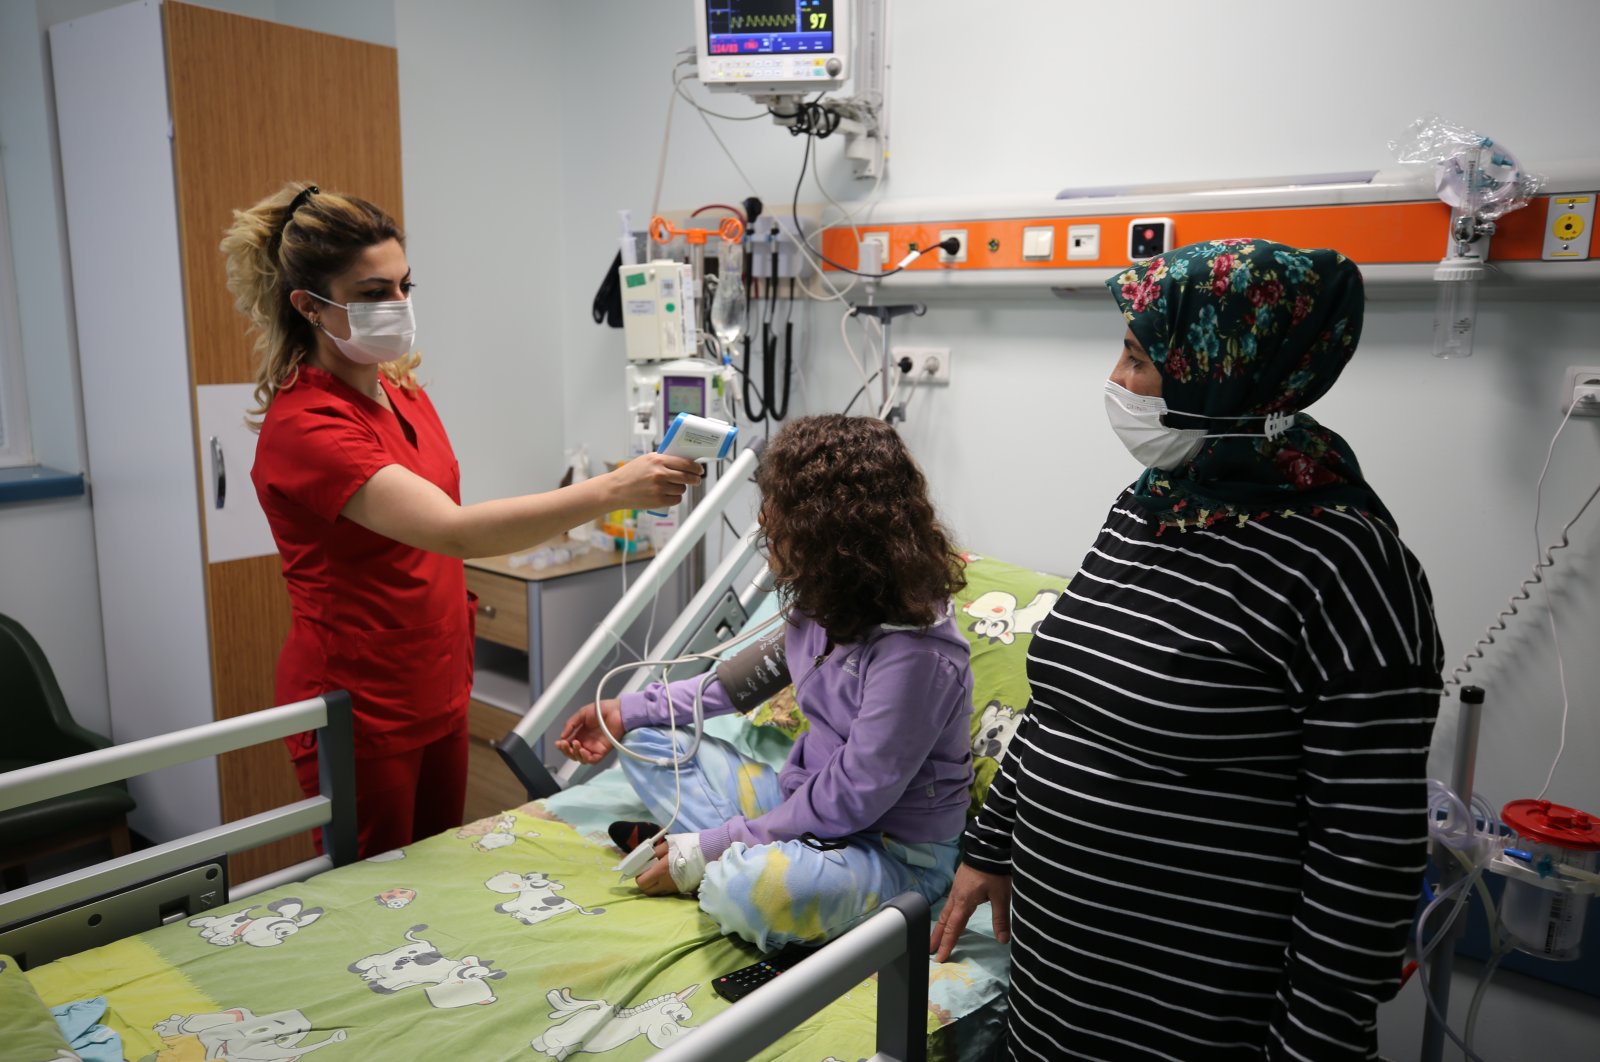 Zeynep and Bersa Bölen, patients with thalassemia, cling to life thanks to stem cells taken from their siblings, Malatya, east-central Turkey, April 28, 2022. (AA Photo)